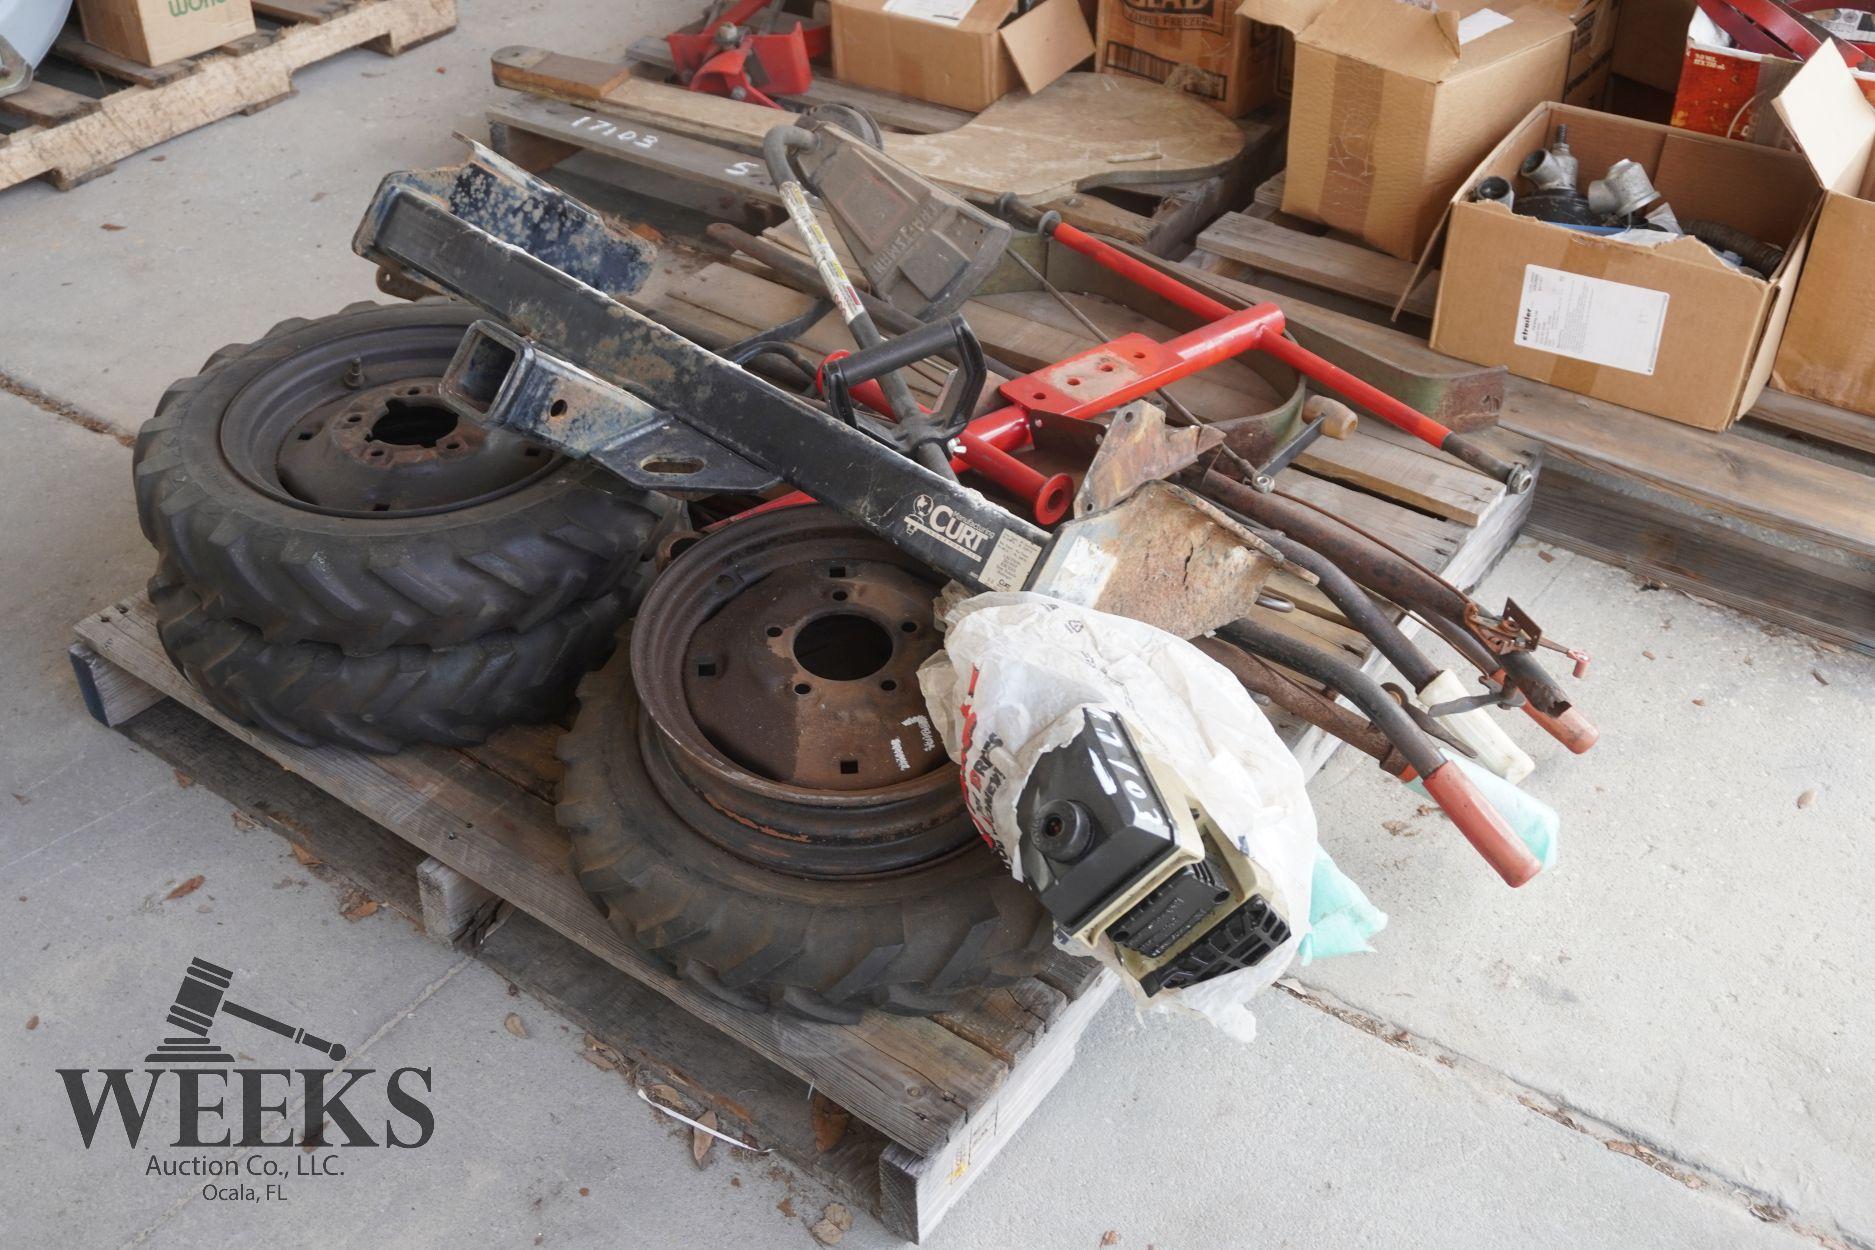 GRAVELY PARTS (5 PALLETS)